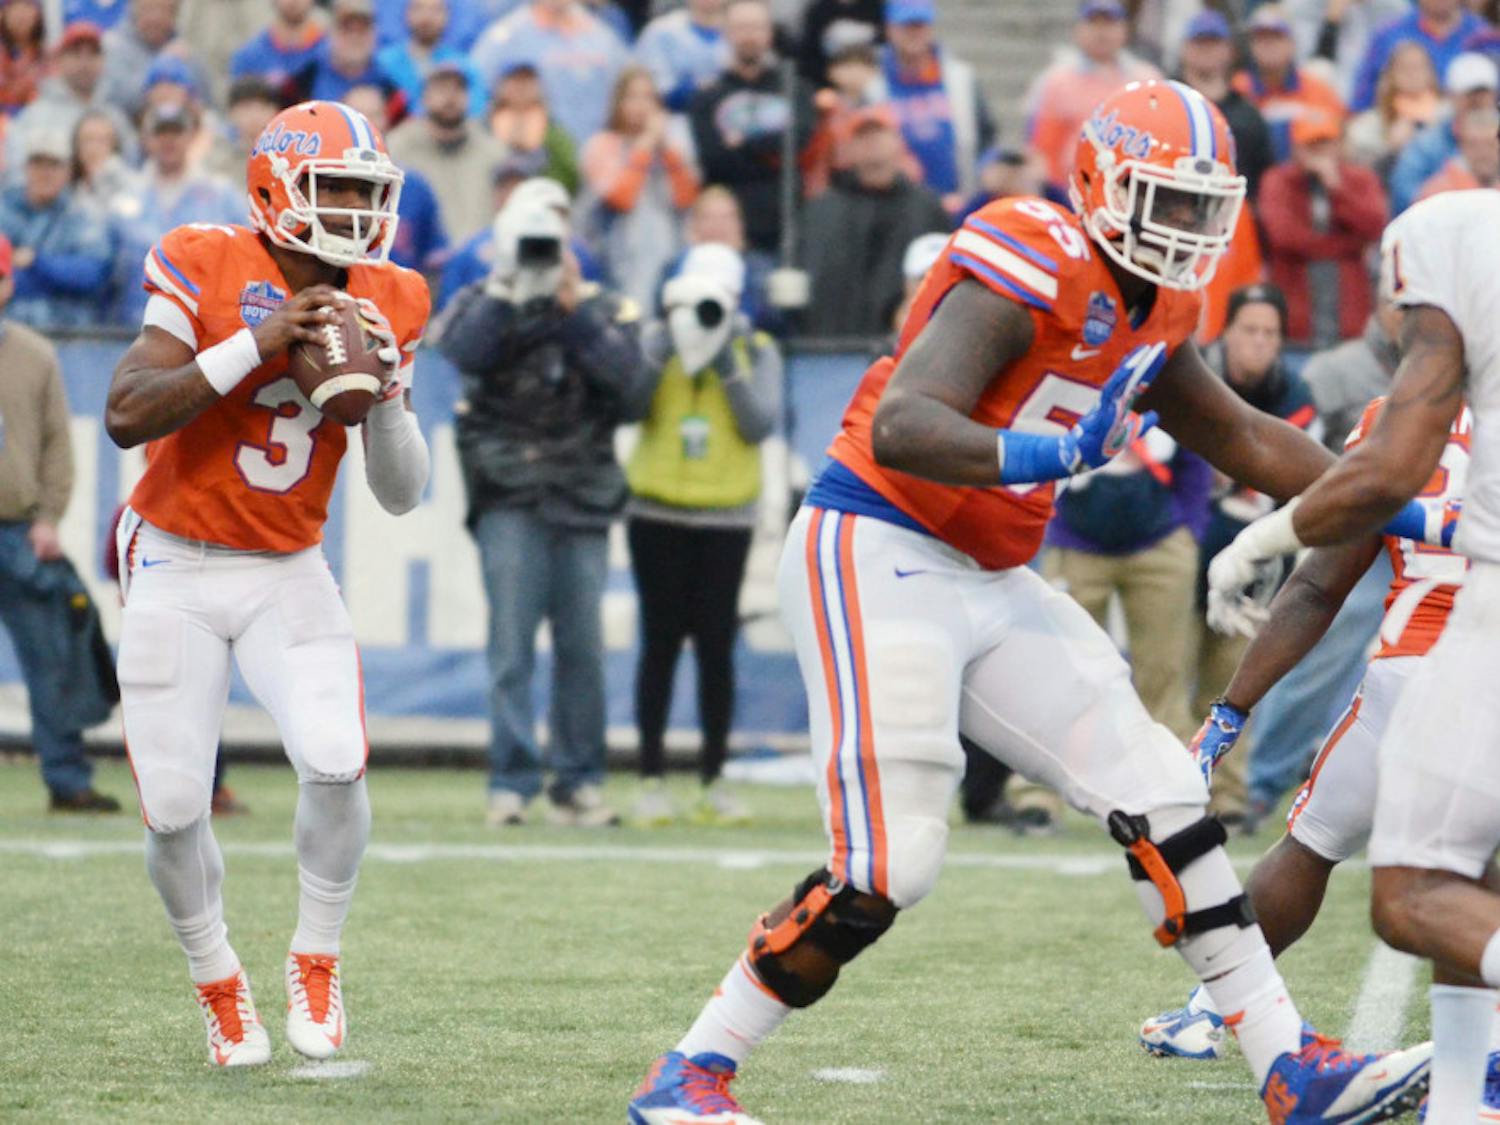 Treon Harris drops back to pass during Florida's 28-20 win in the Birmingham Bowl against East Carolina on Jan. 3 at Legion Field.